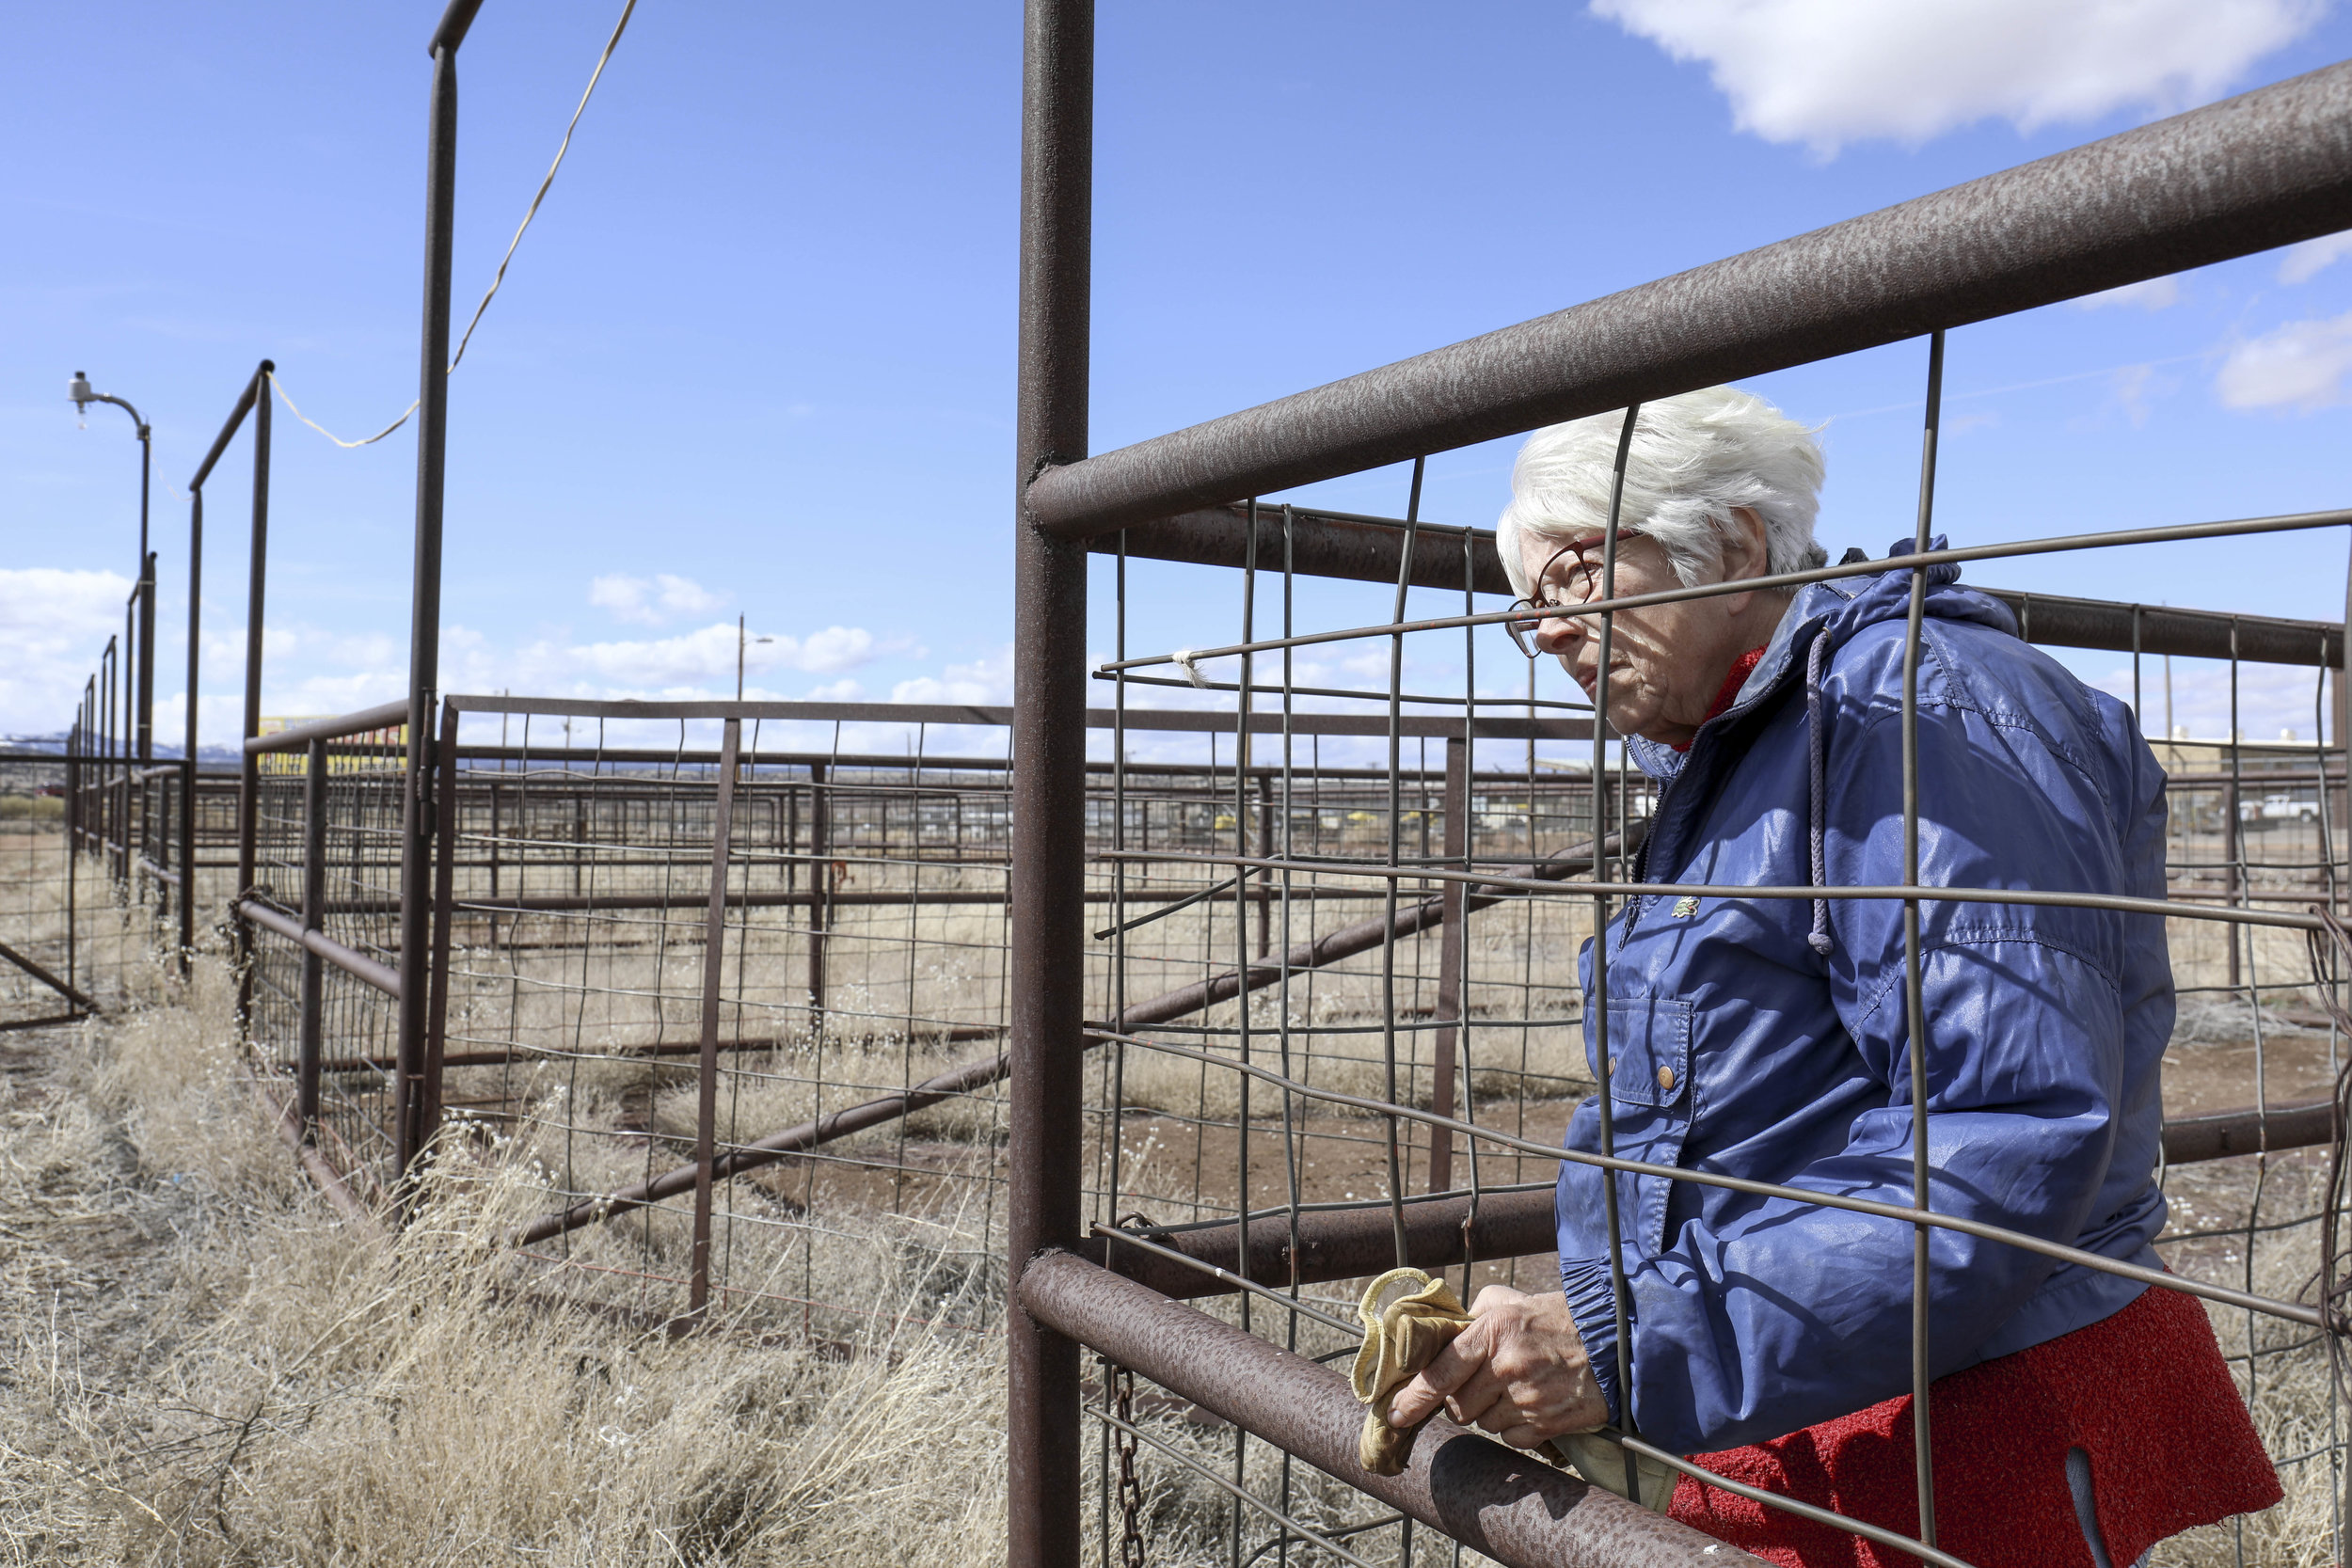  Sandy Johnson, looks  out at the pens at Mustang Camp in Milan, New Mexico, on March 3. Mustang Camp agreed to train and assist in finding adoptive homes for 54 of the horses from Placitas Wild.     